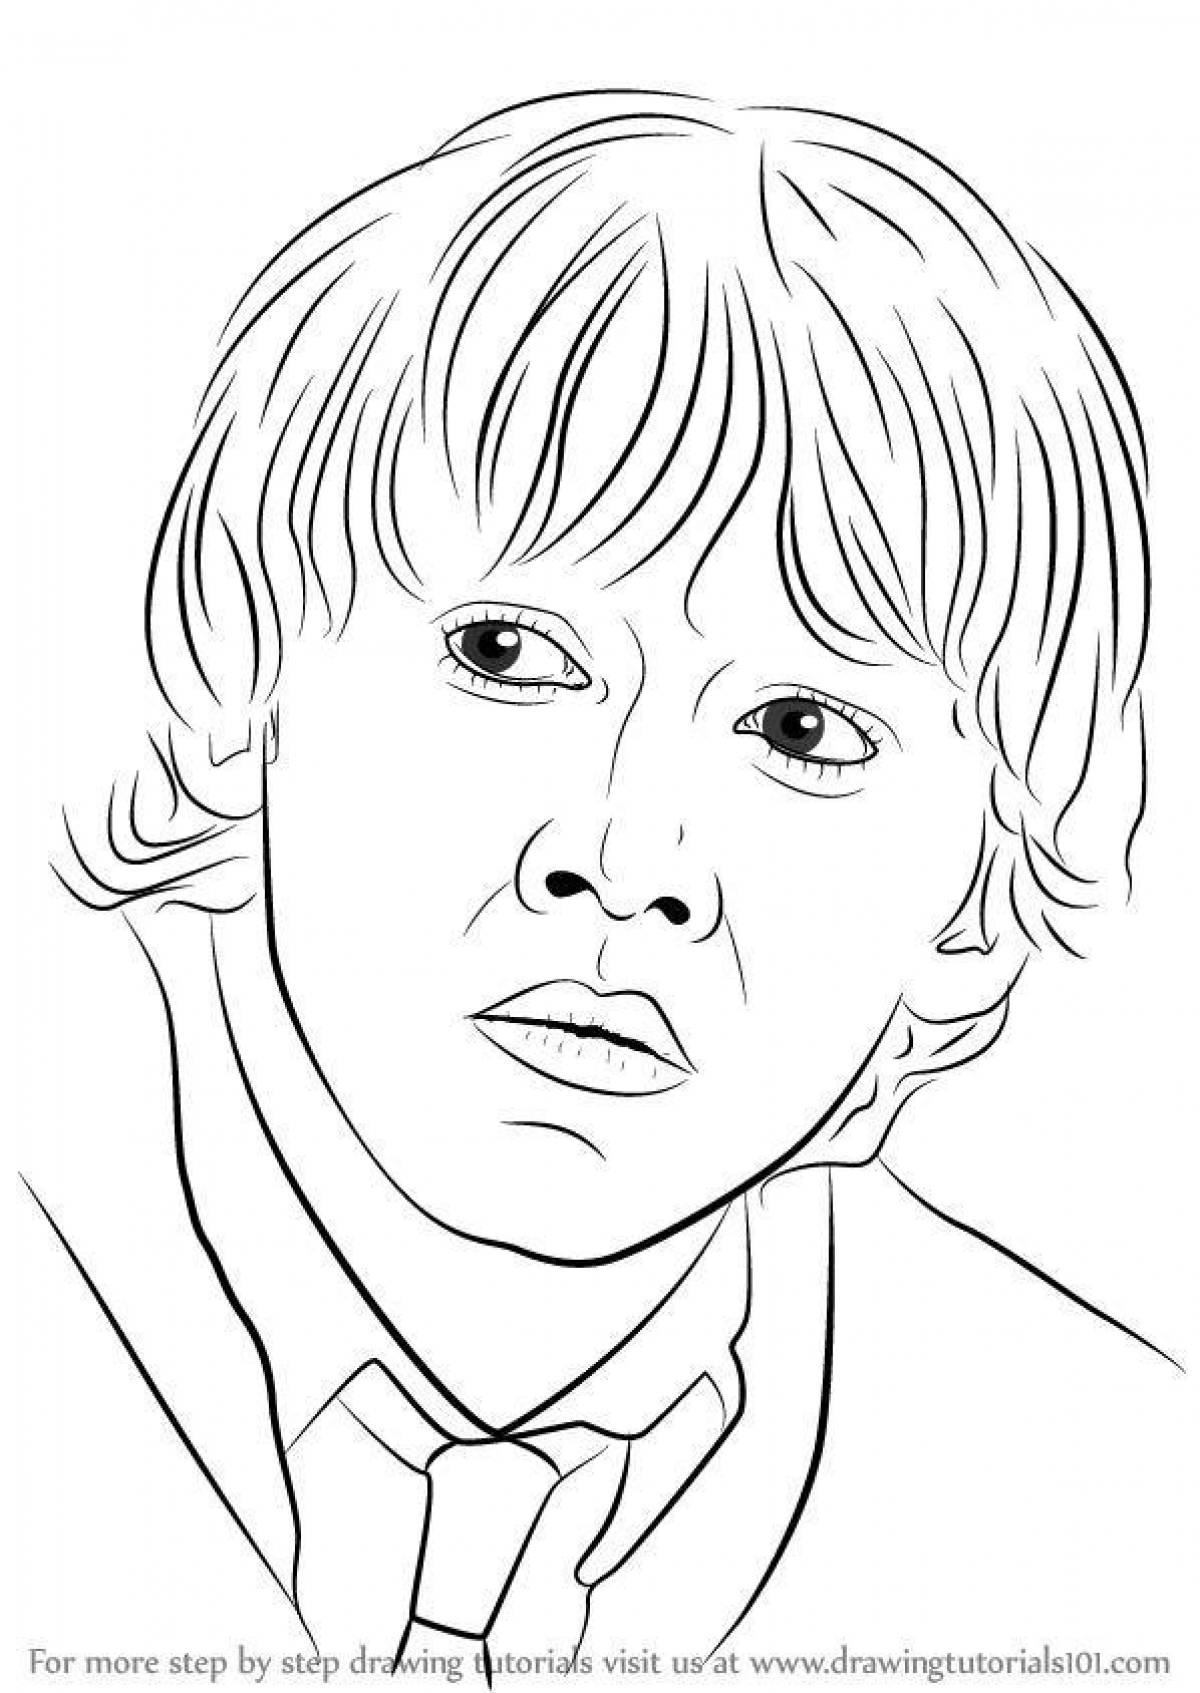 Colour-obsessed ron coloring book